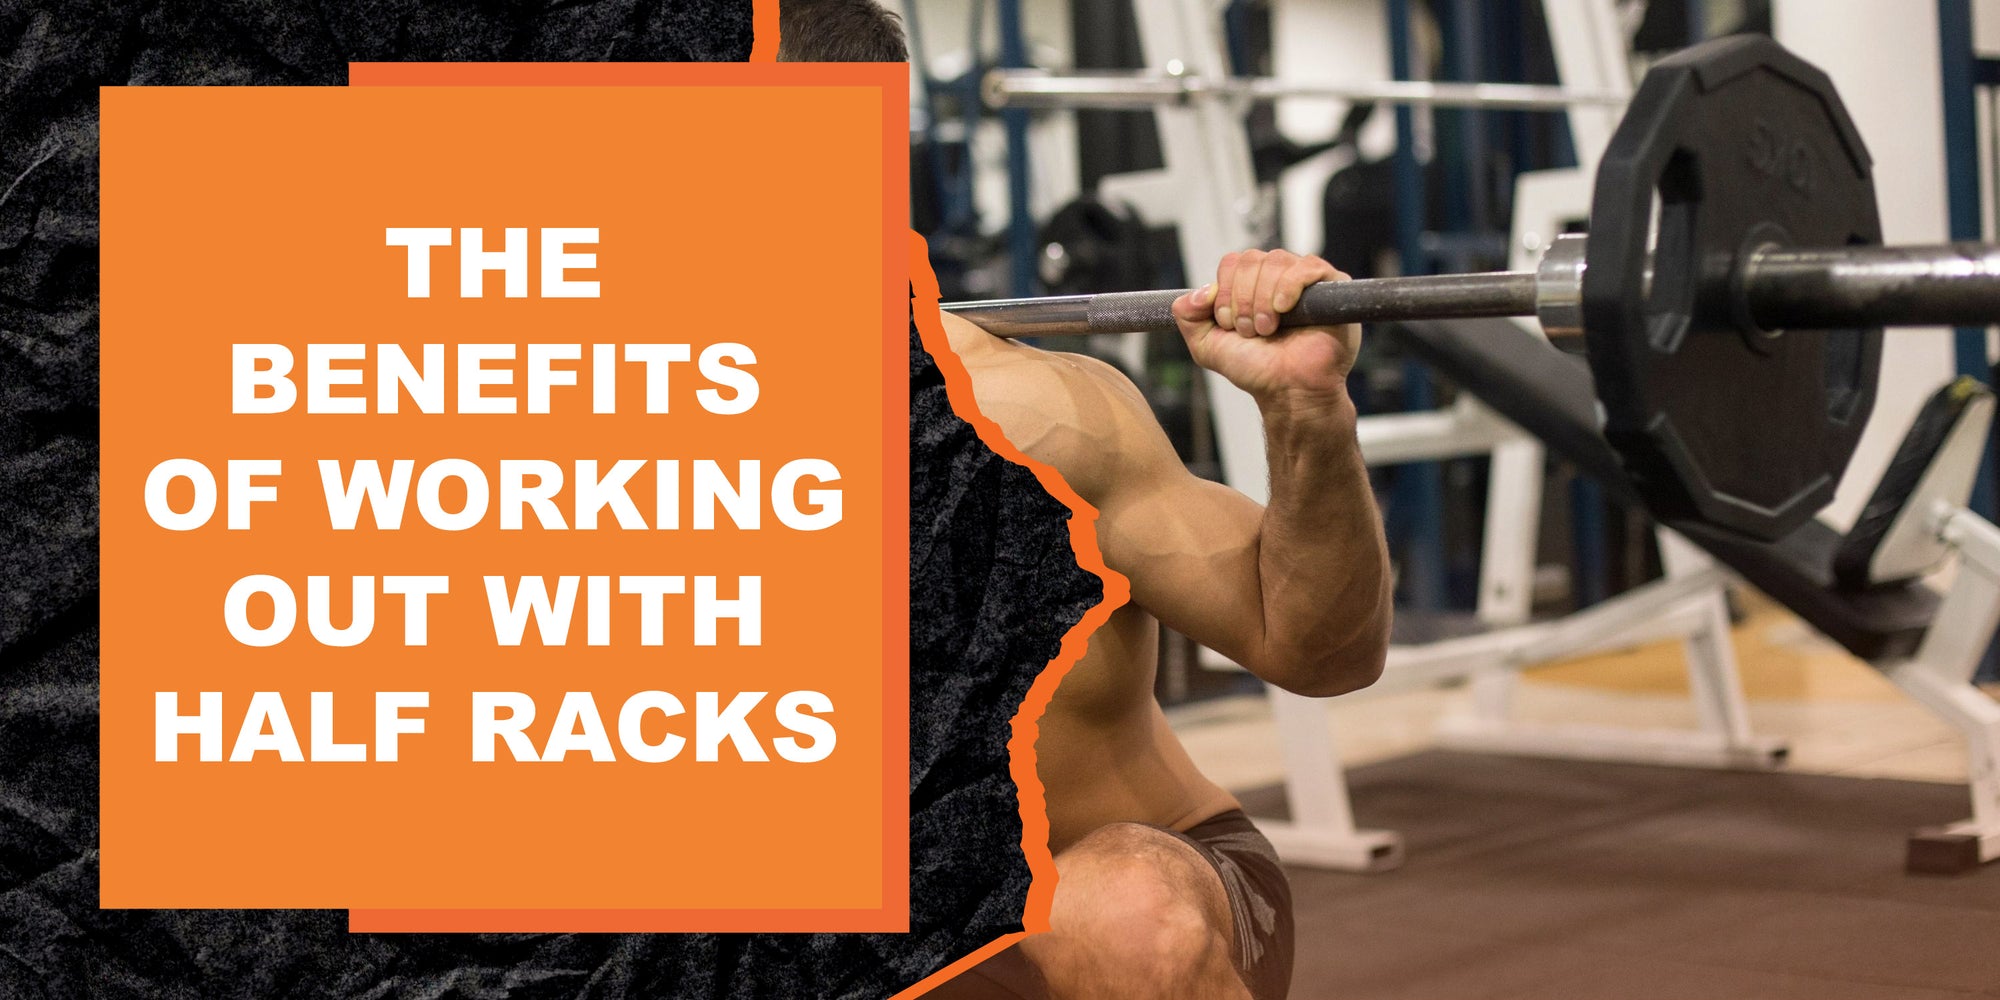 The Benefits of Working Out with Half Racks